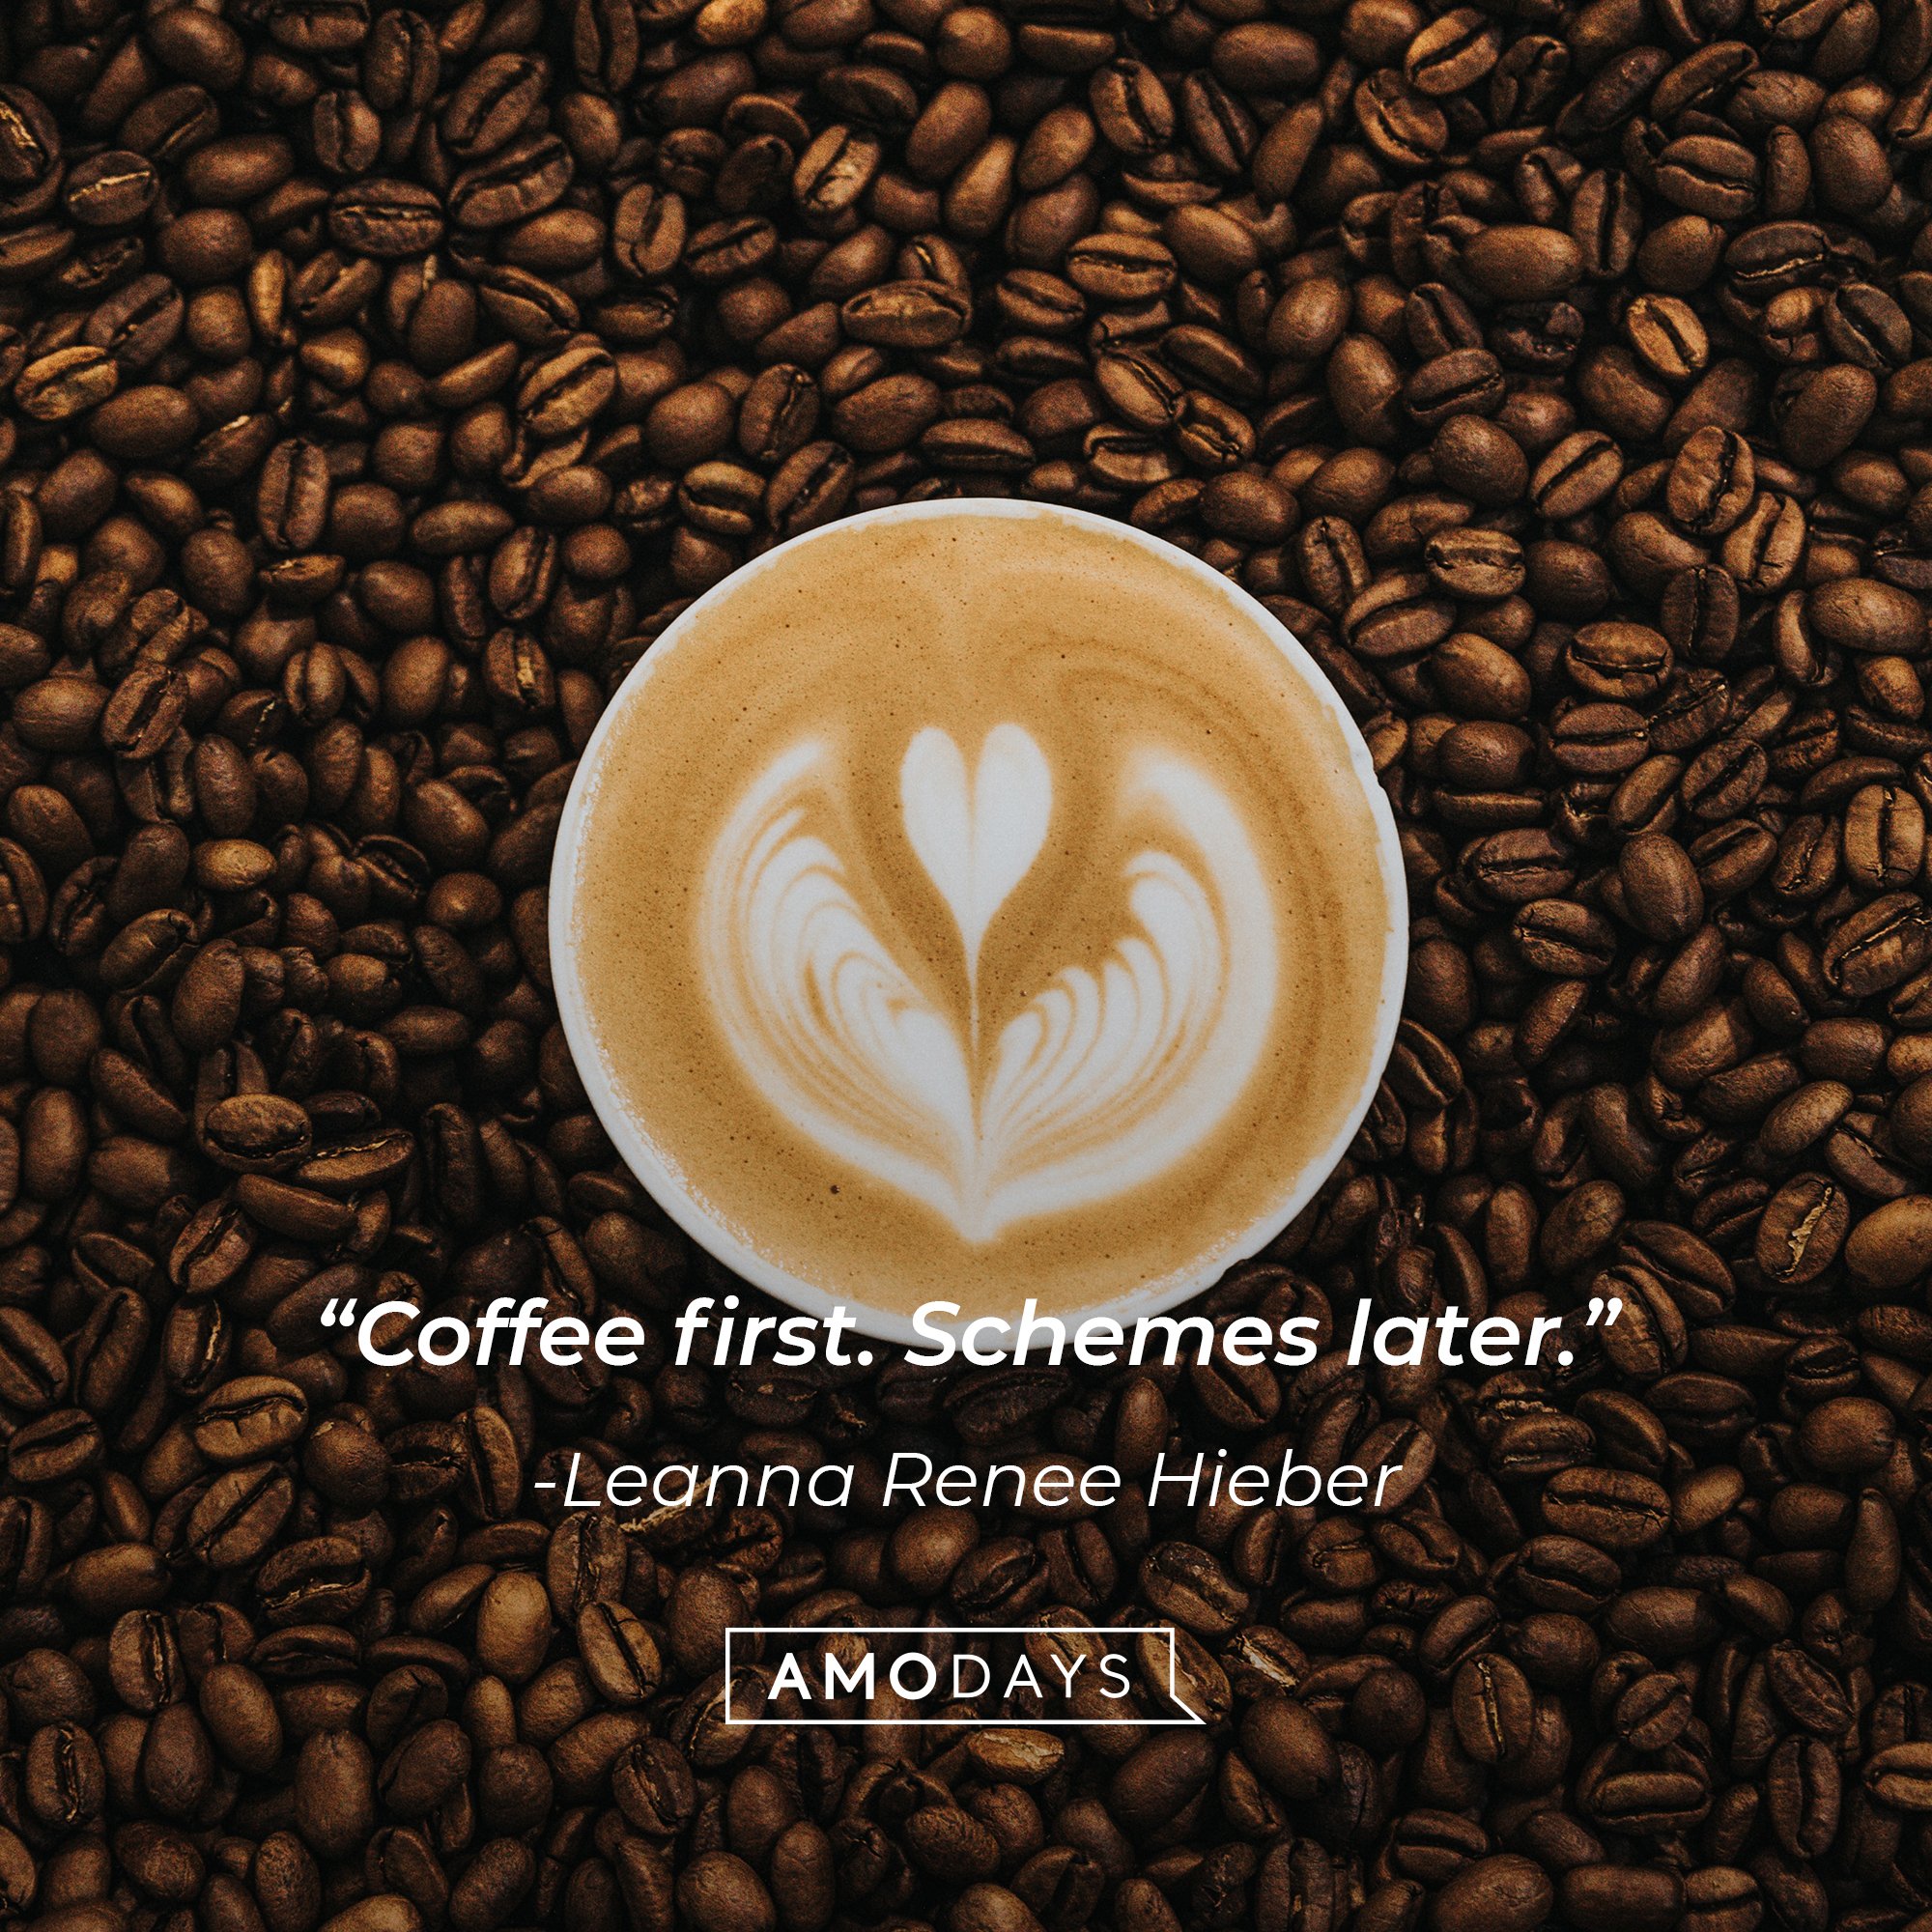 Leanna Renee Hieber's quote: "Coffee first. Schemes later." | Image: AmoDays